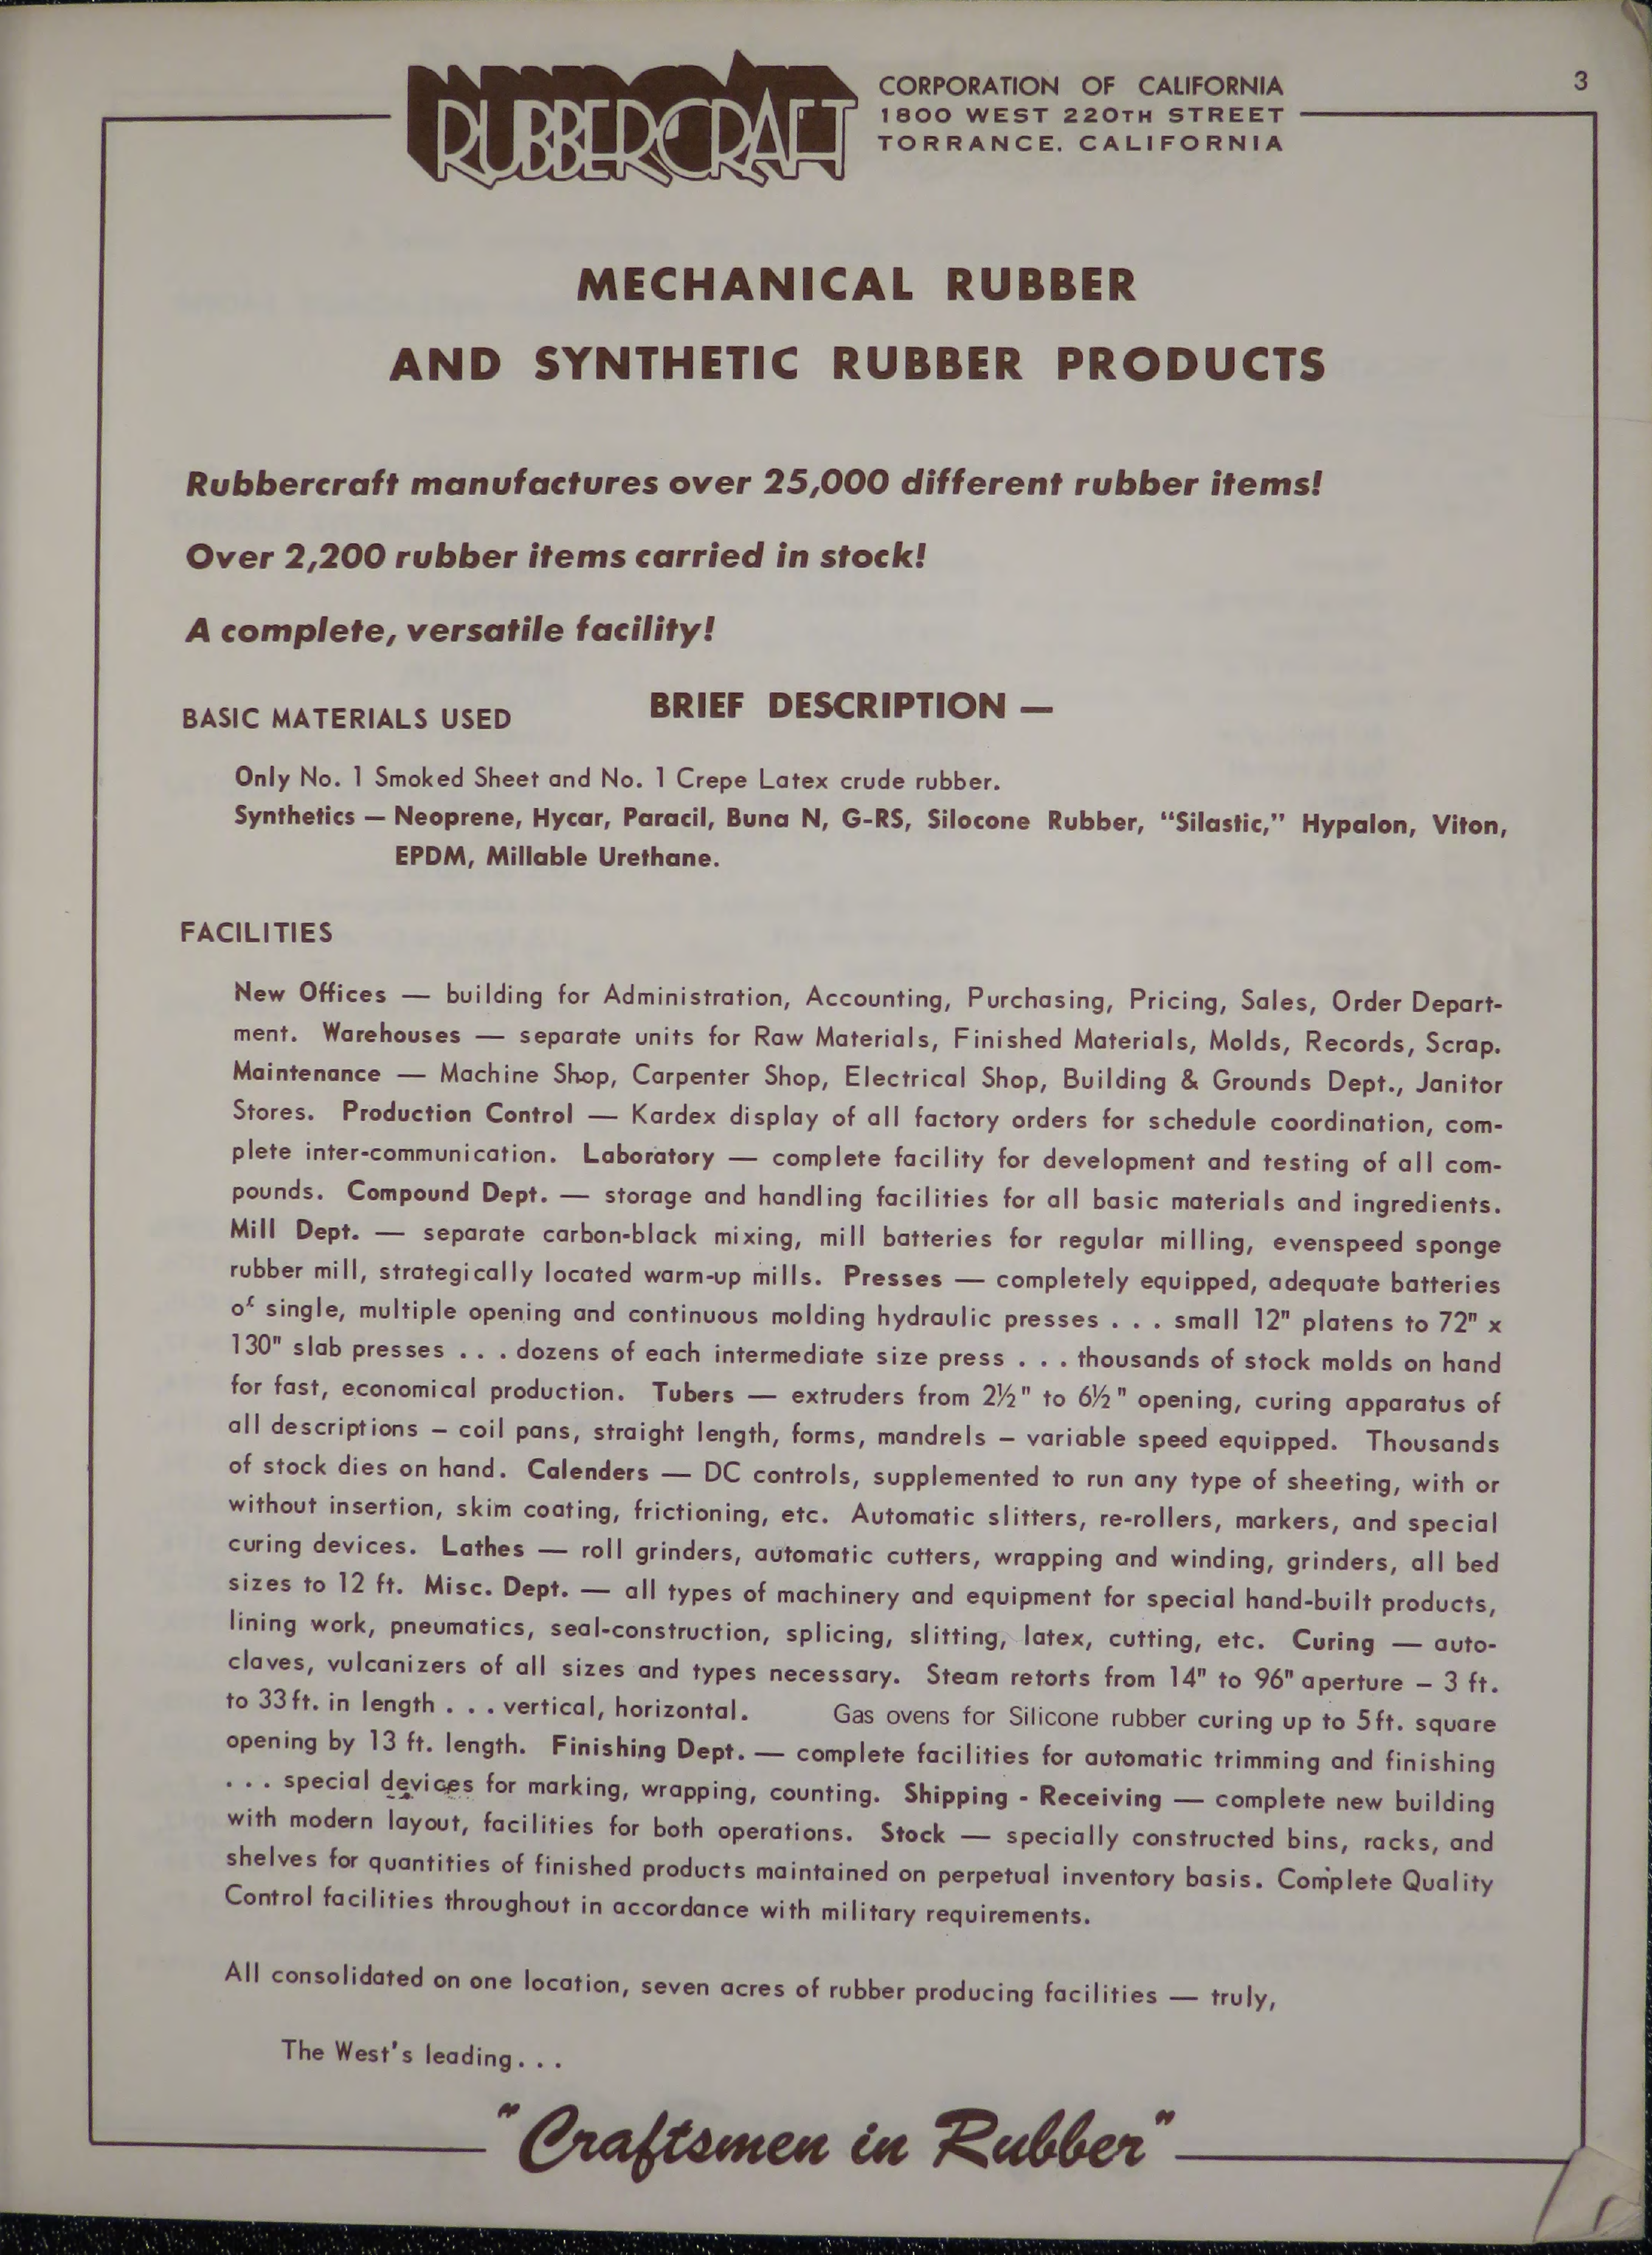 Sample page 5 from AirCorps Library document: Craftsmen in Rubber